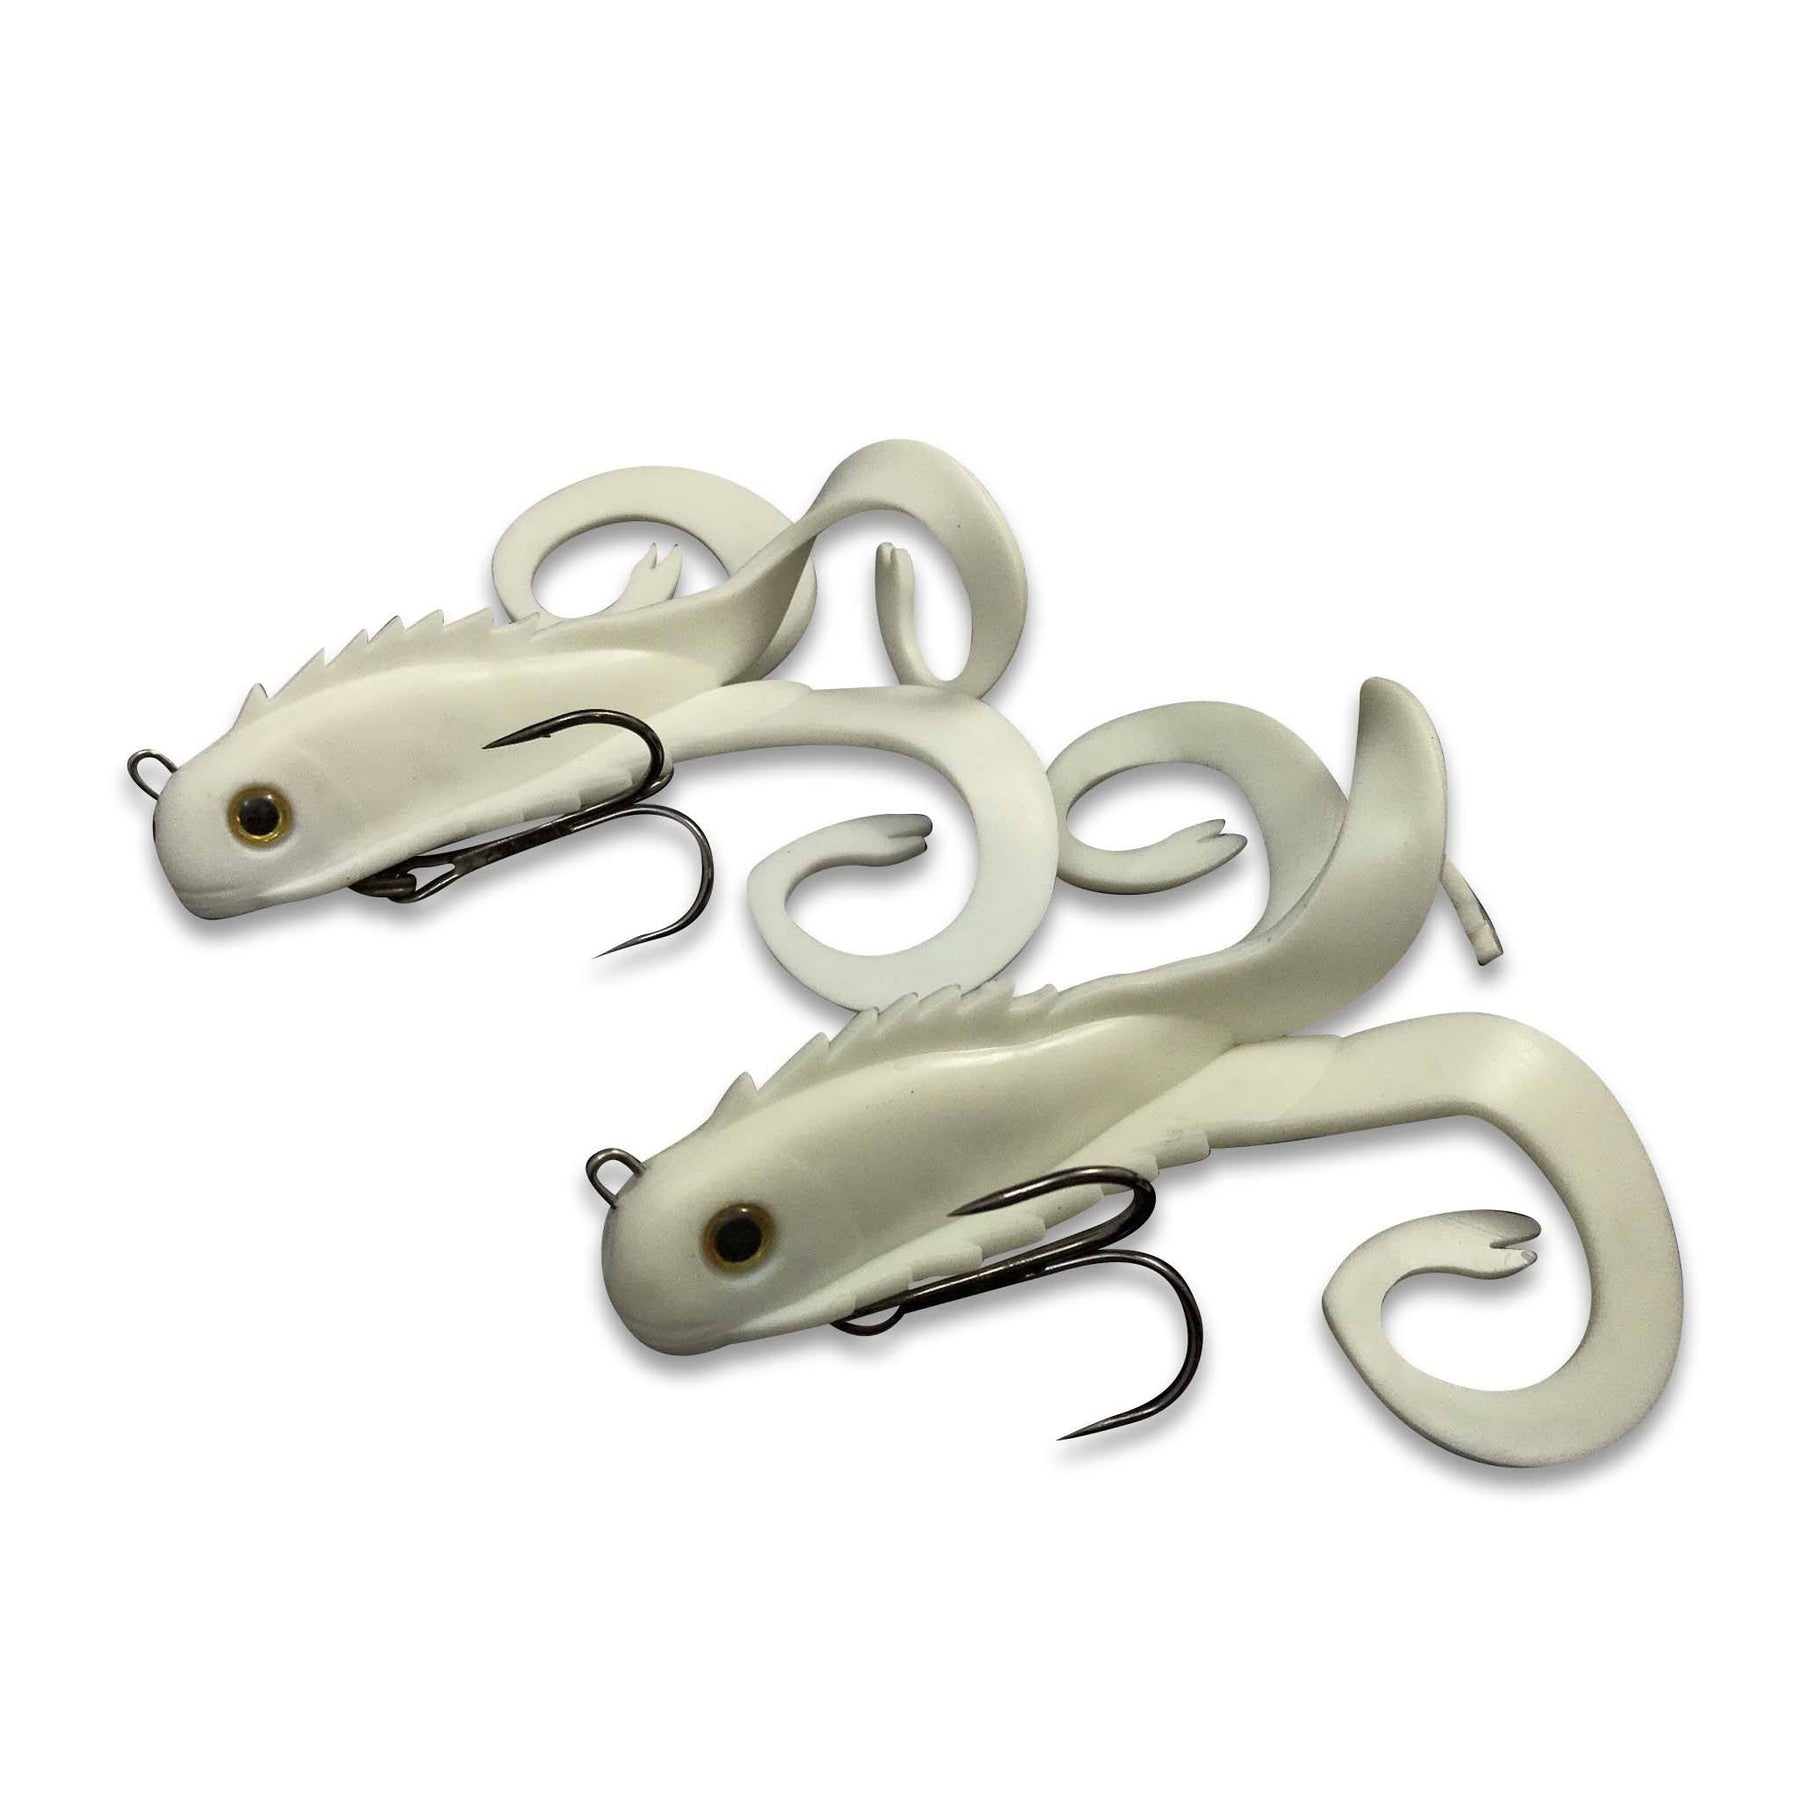 The Hook Up Tackle Sales Shop: Swim Jigs - Gift For Him, For Her